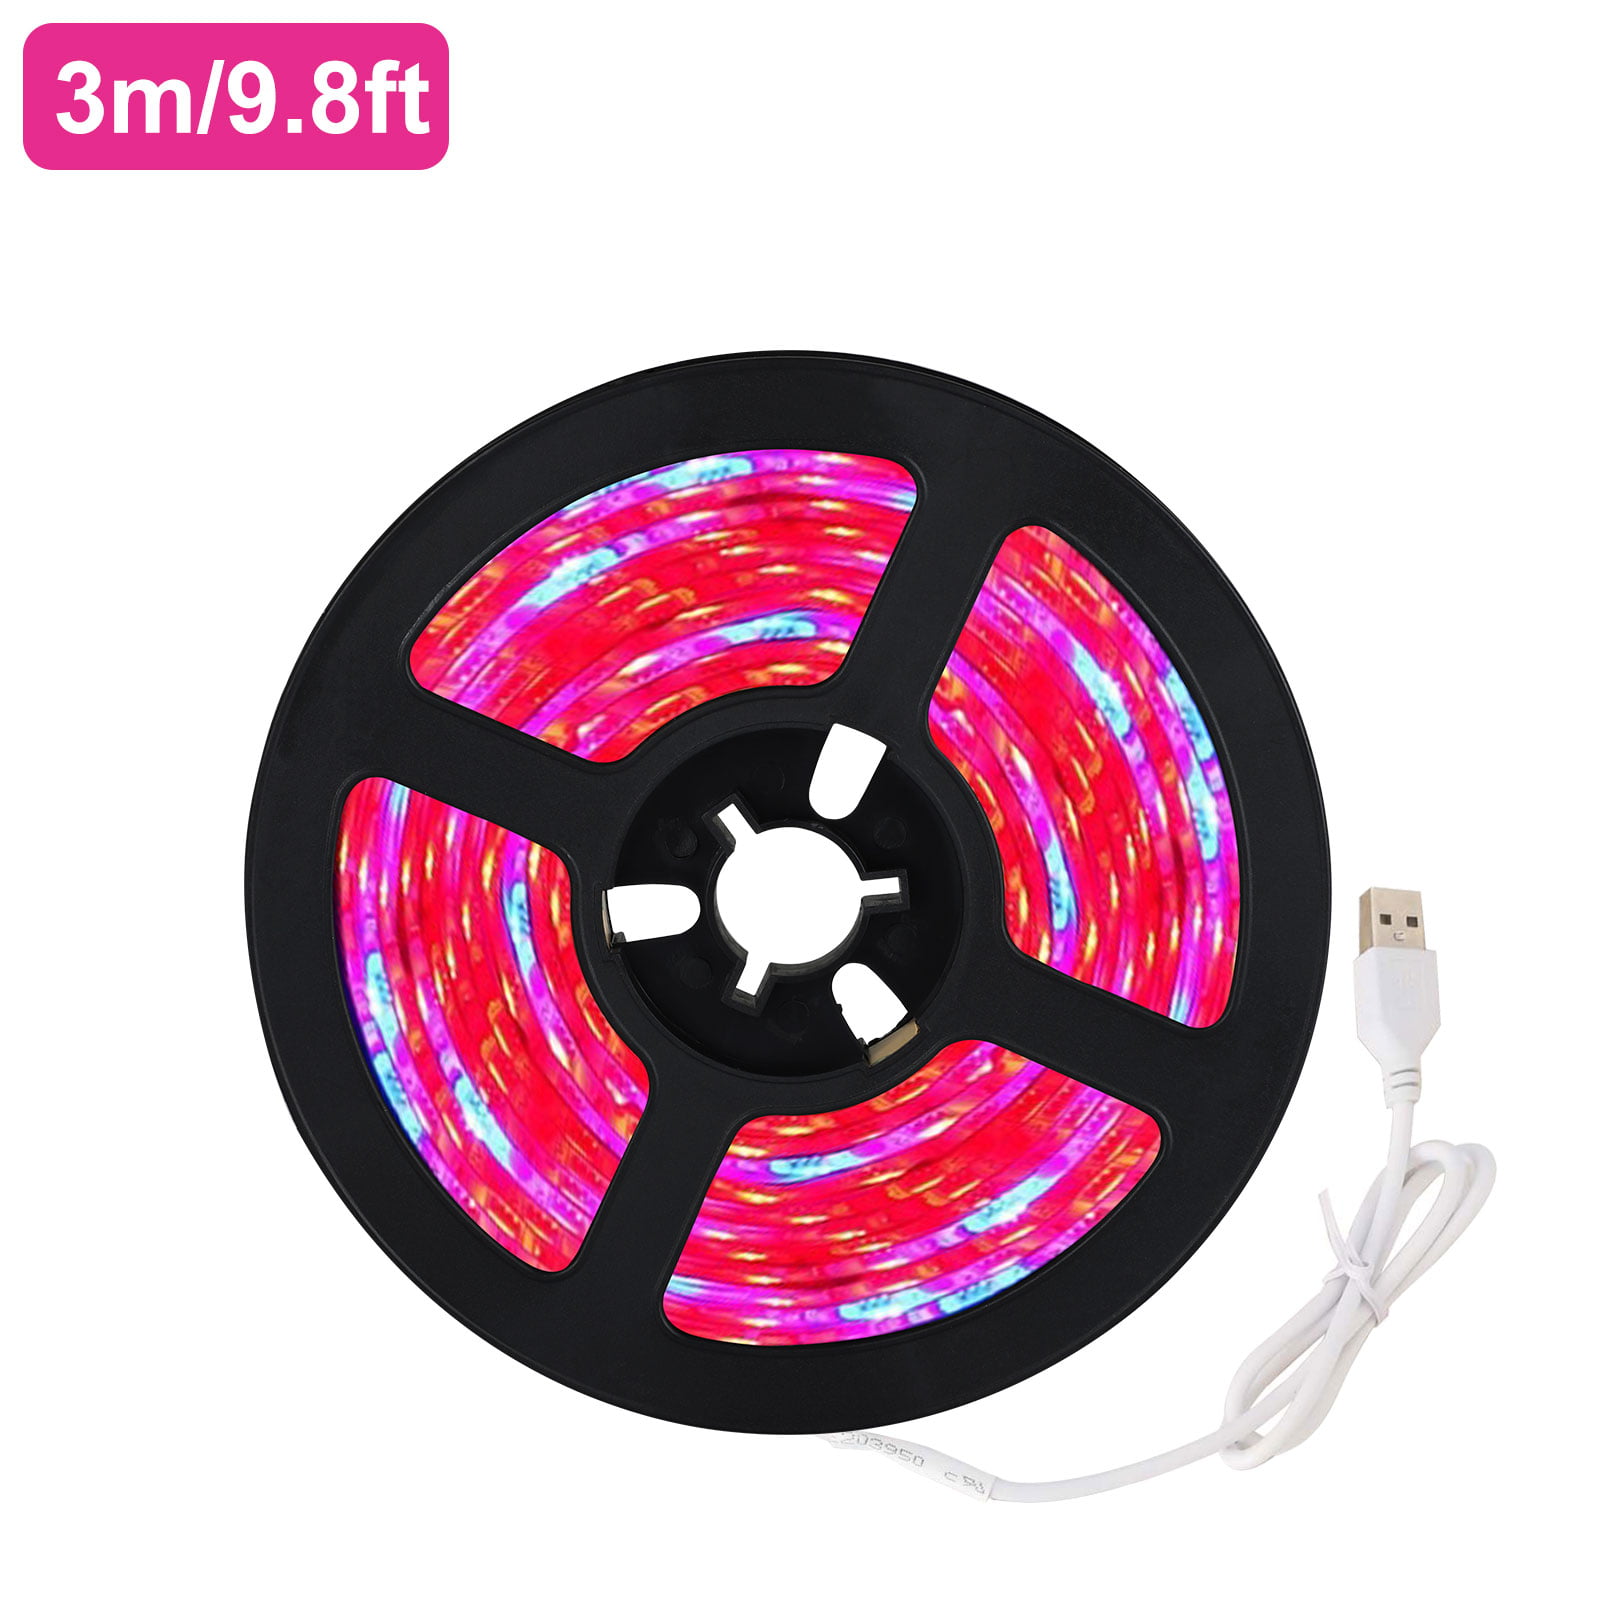 1M 5050 LED Strip Grow Light Lamp For Indoor Plants veg Greenhouse Hydroponic 